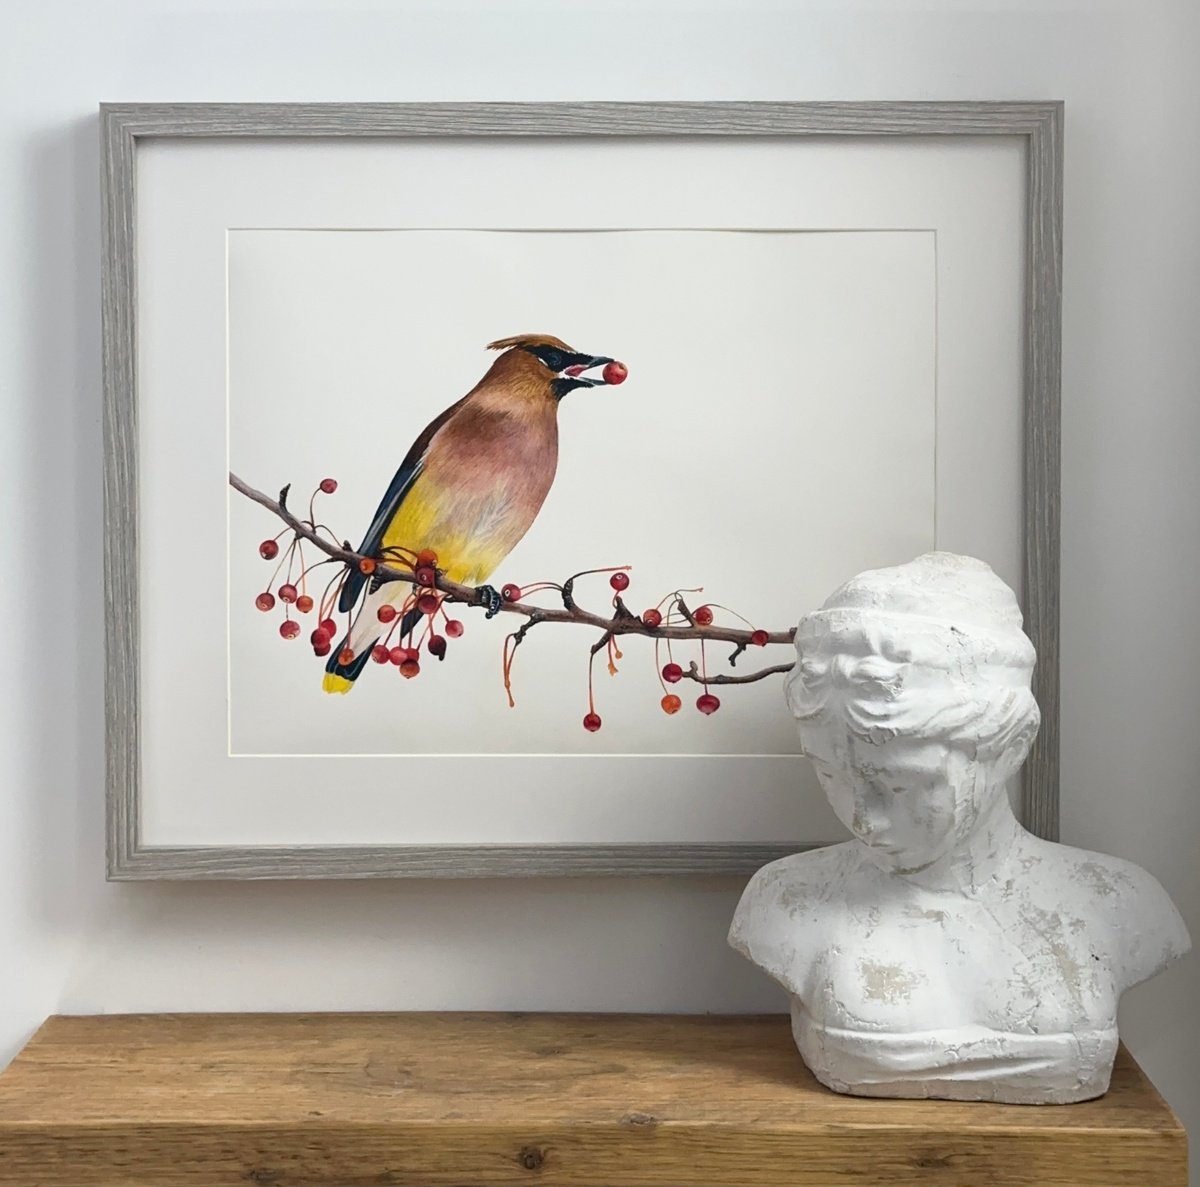 The Bohemian Waxwing by Irsa Ervin